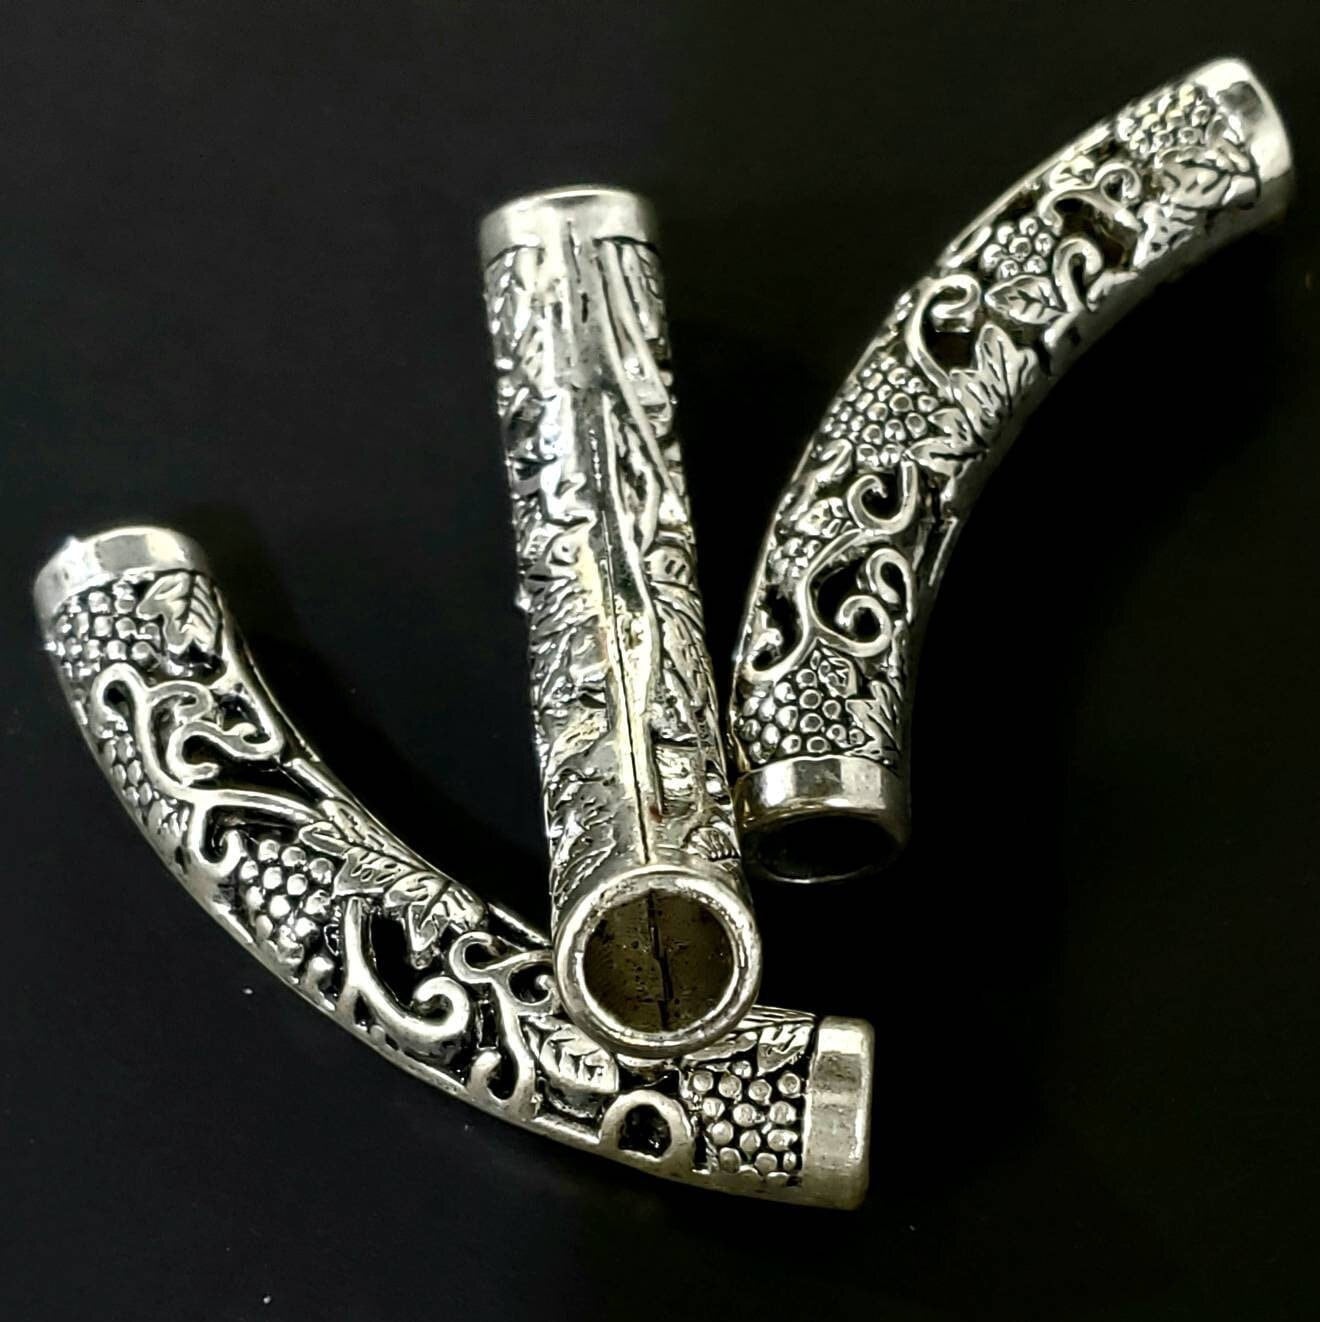 2 pieces Bali style Curved tube antique finished filigree large curved tube 50mm long,jewelry making focal tube.